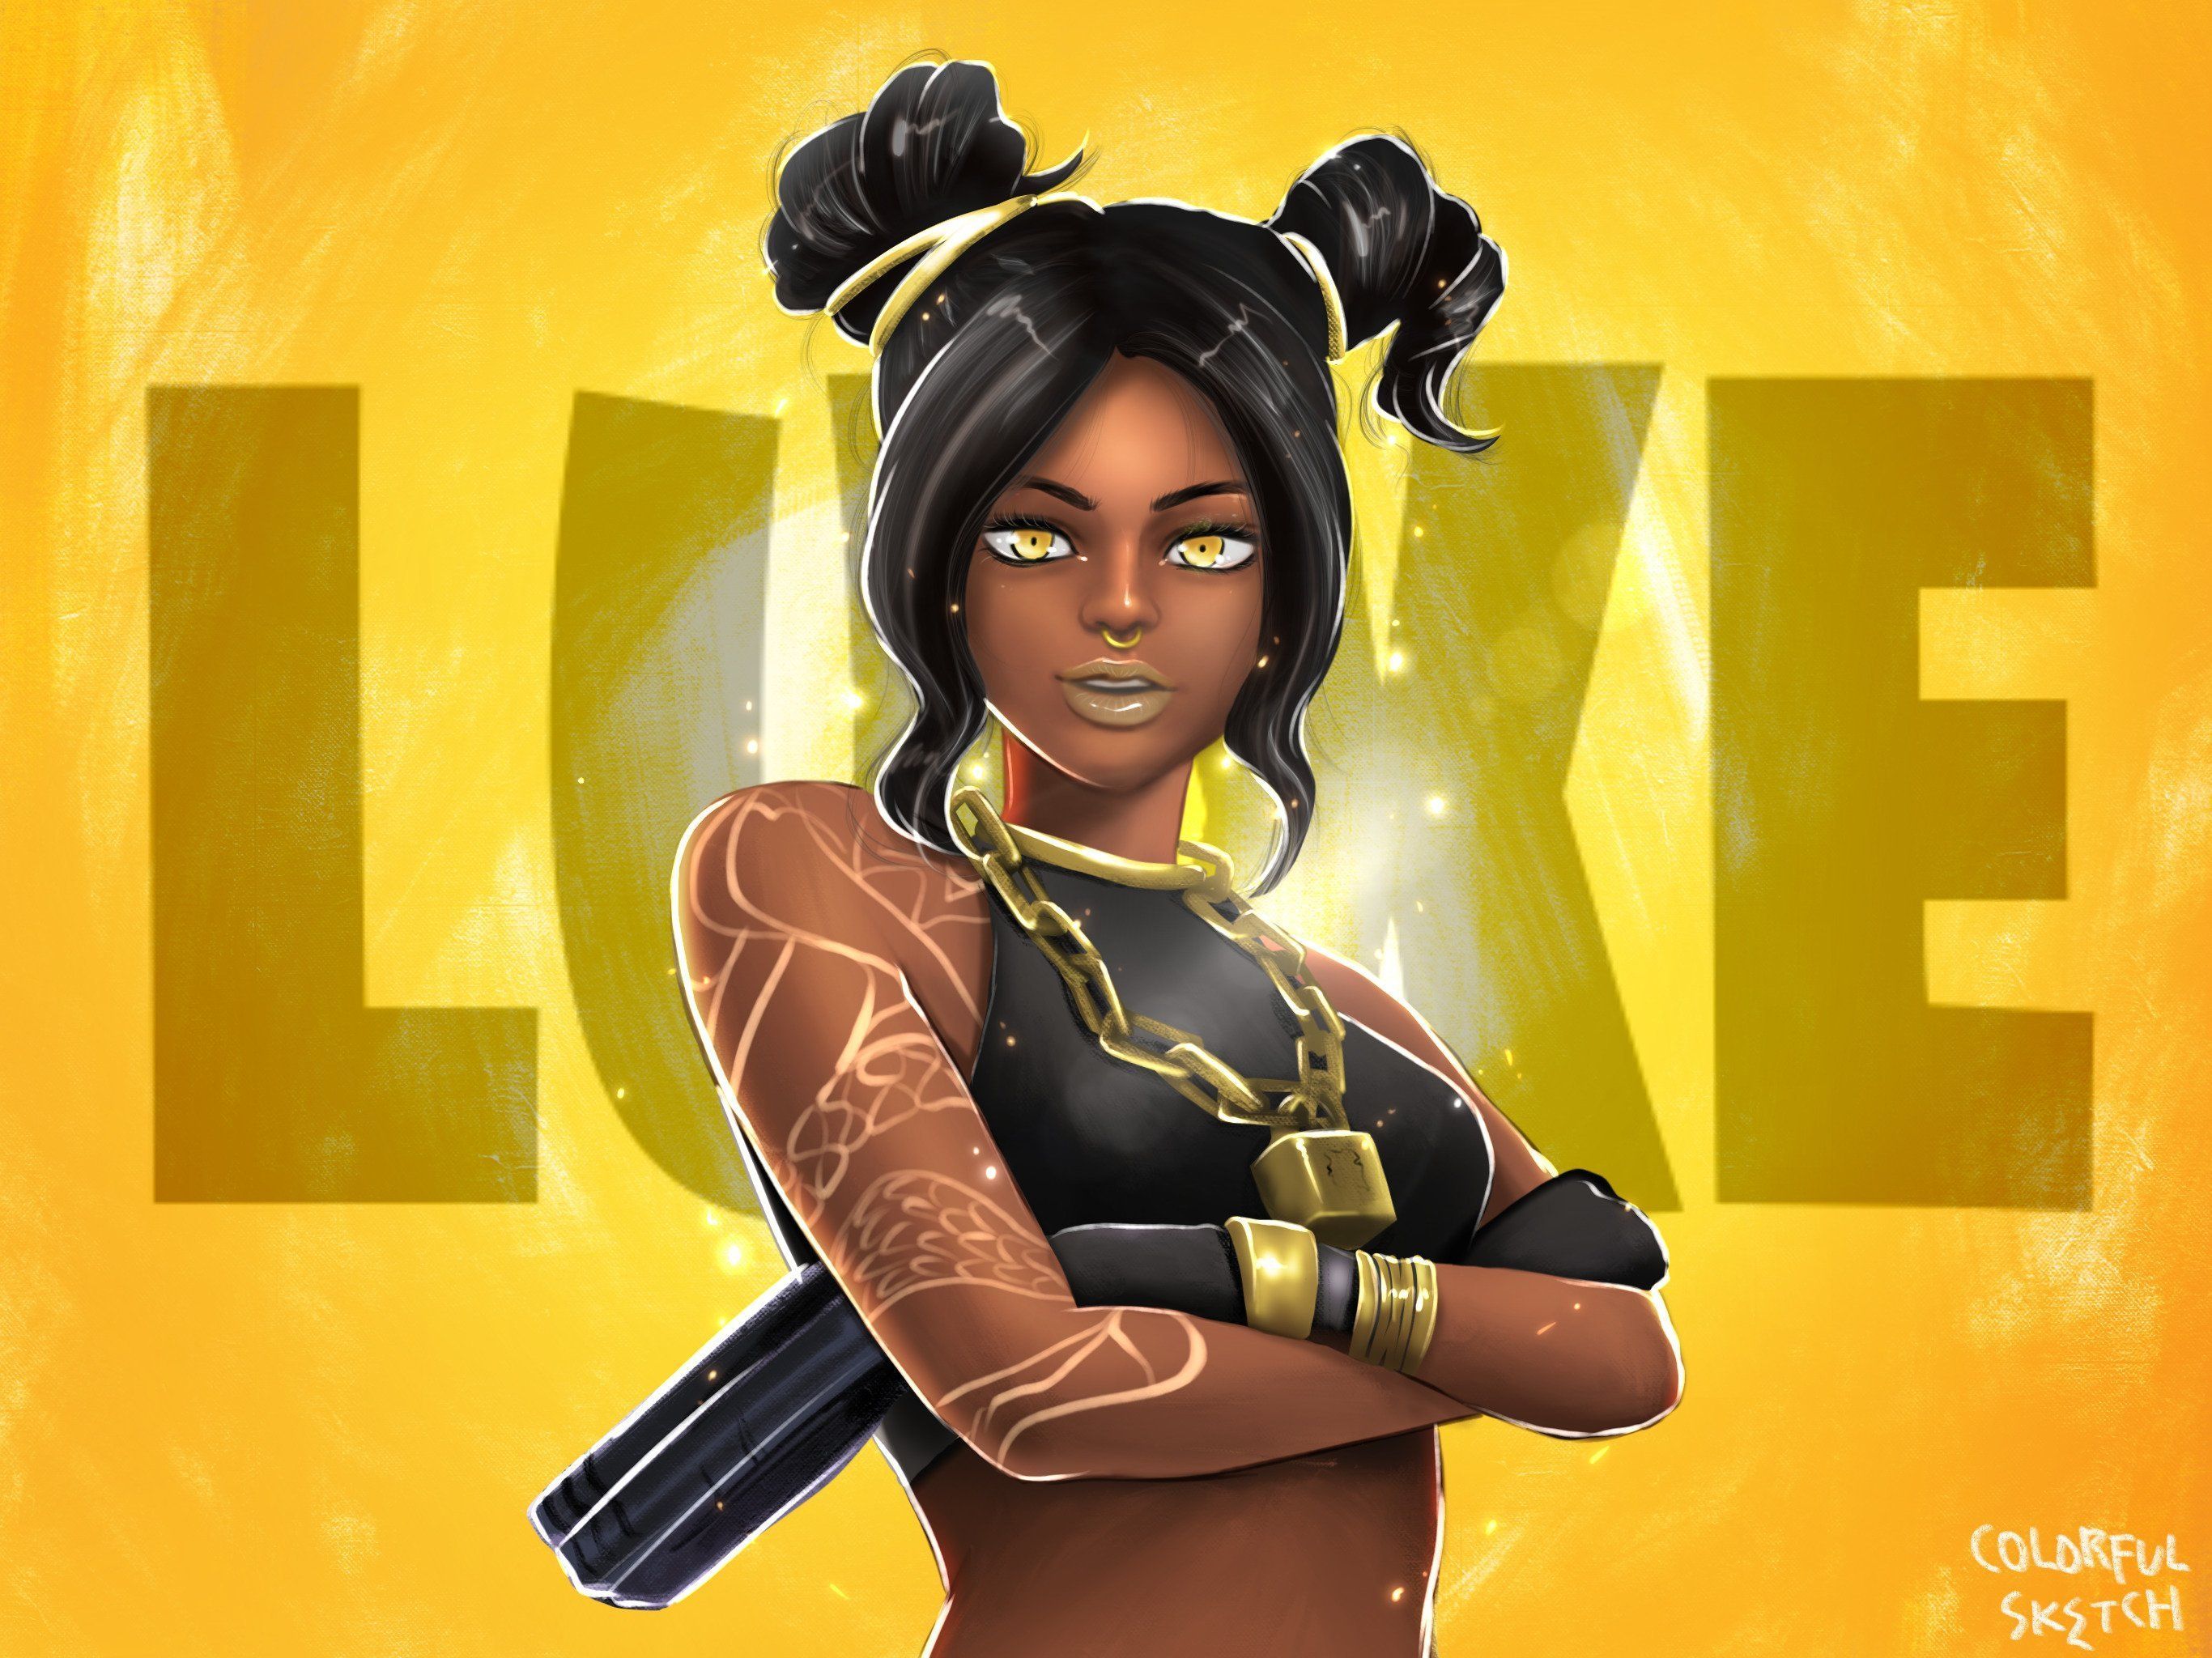 A black girl in a black top with tattoos and a gold chain around her neck, with her hair in two buns, holding a bat in front of a yellow background - Fortnite